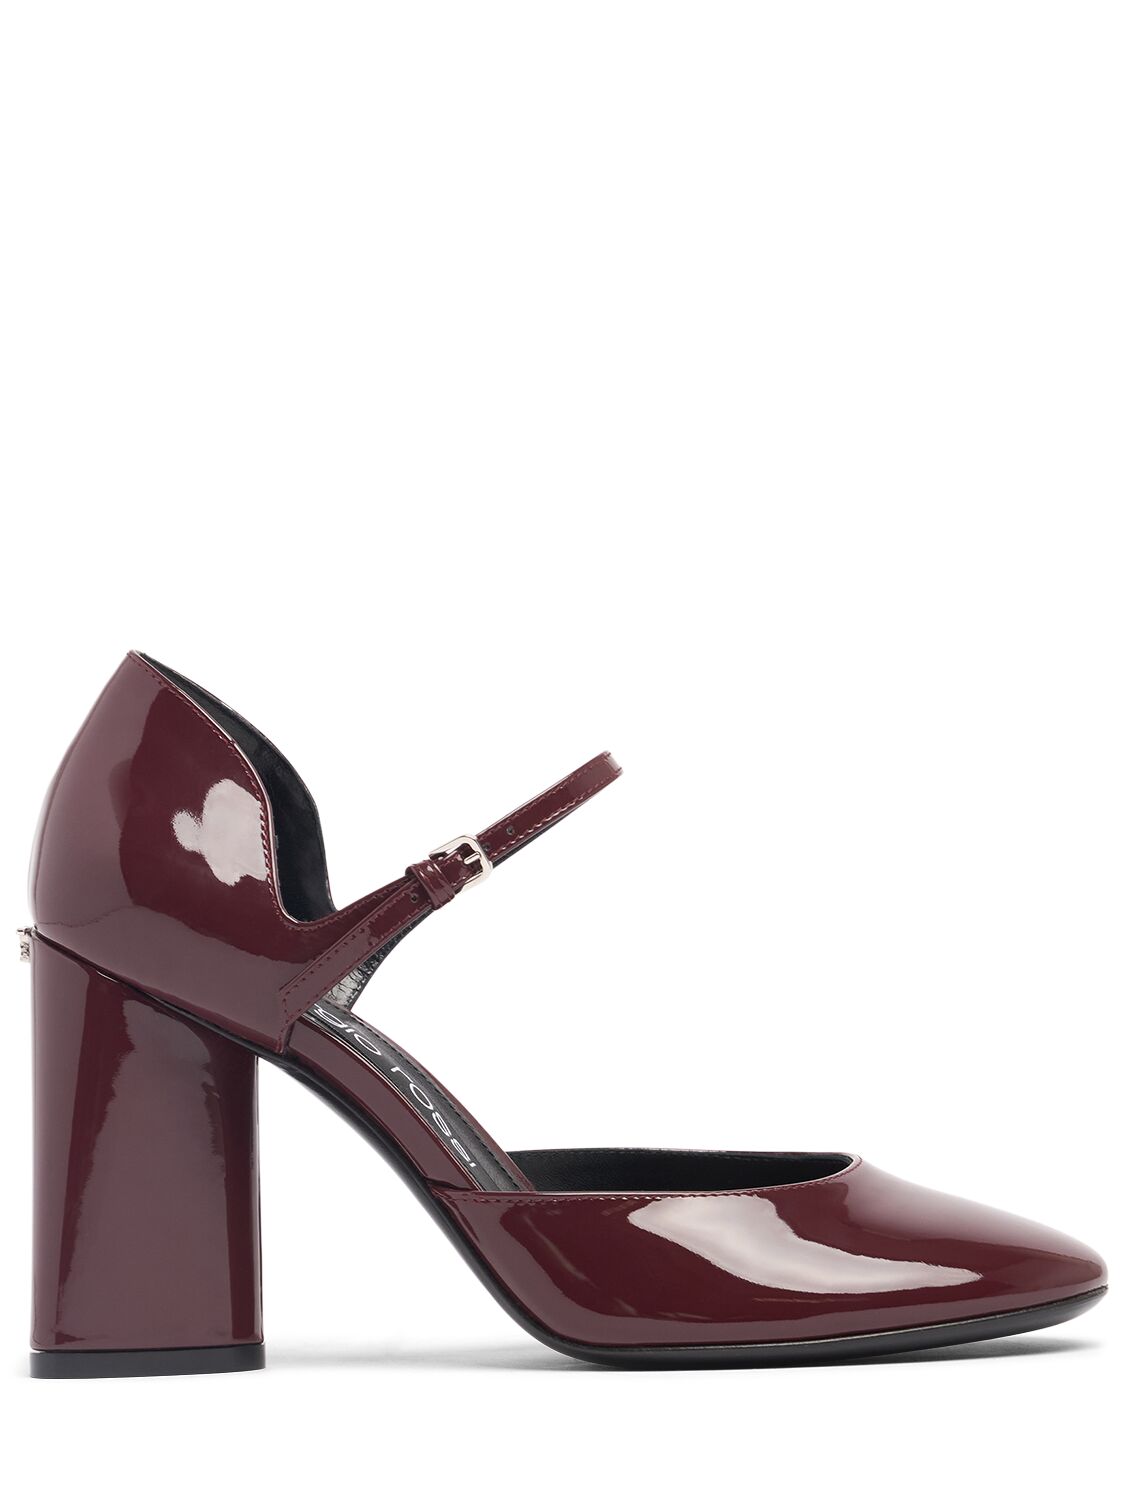 Sergio Rossi 50mm Patent Leather Pumps In Burgundy